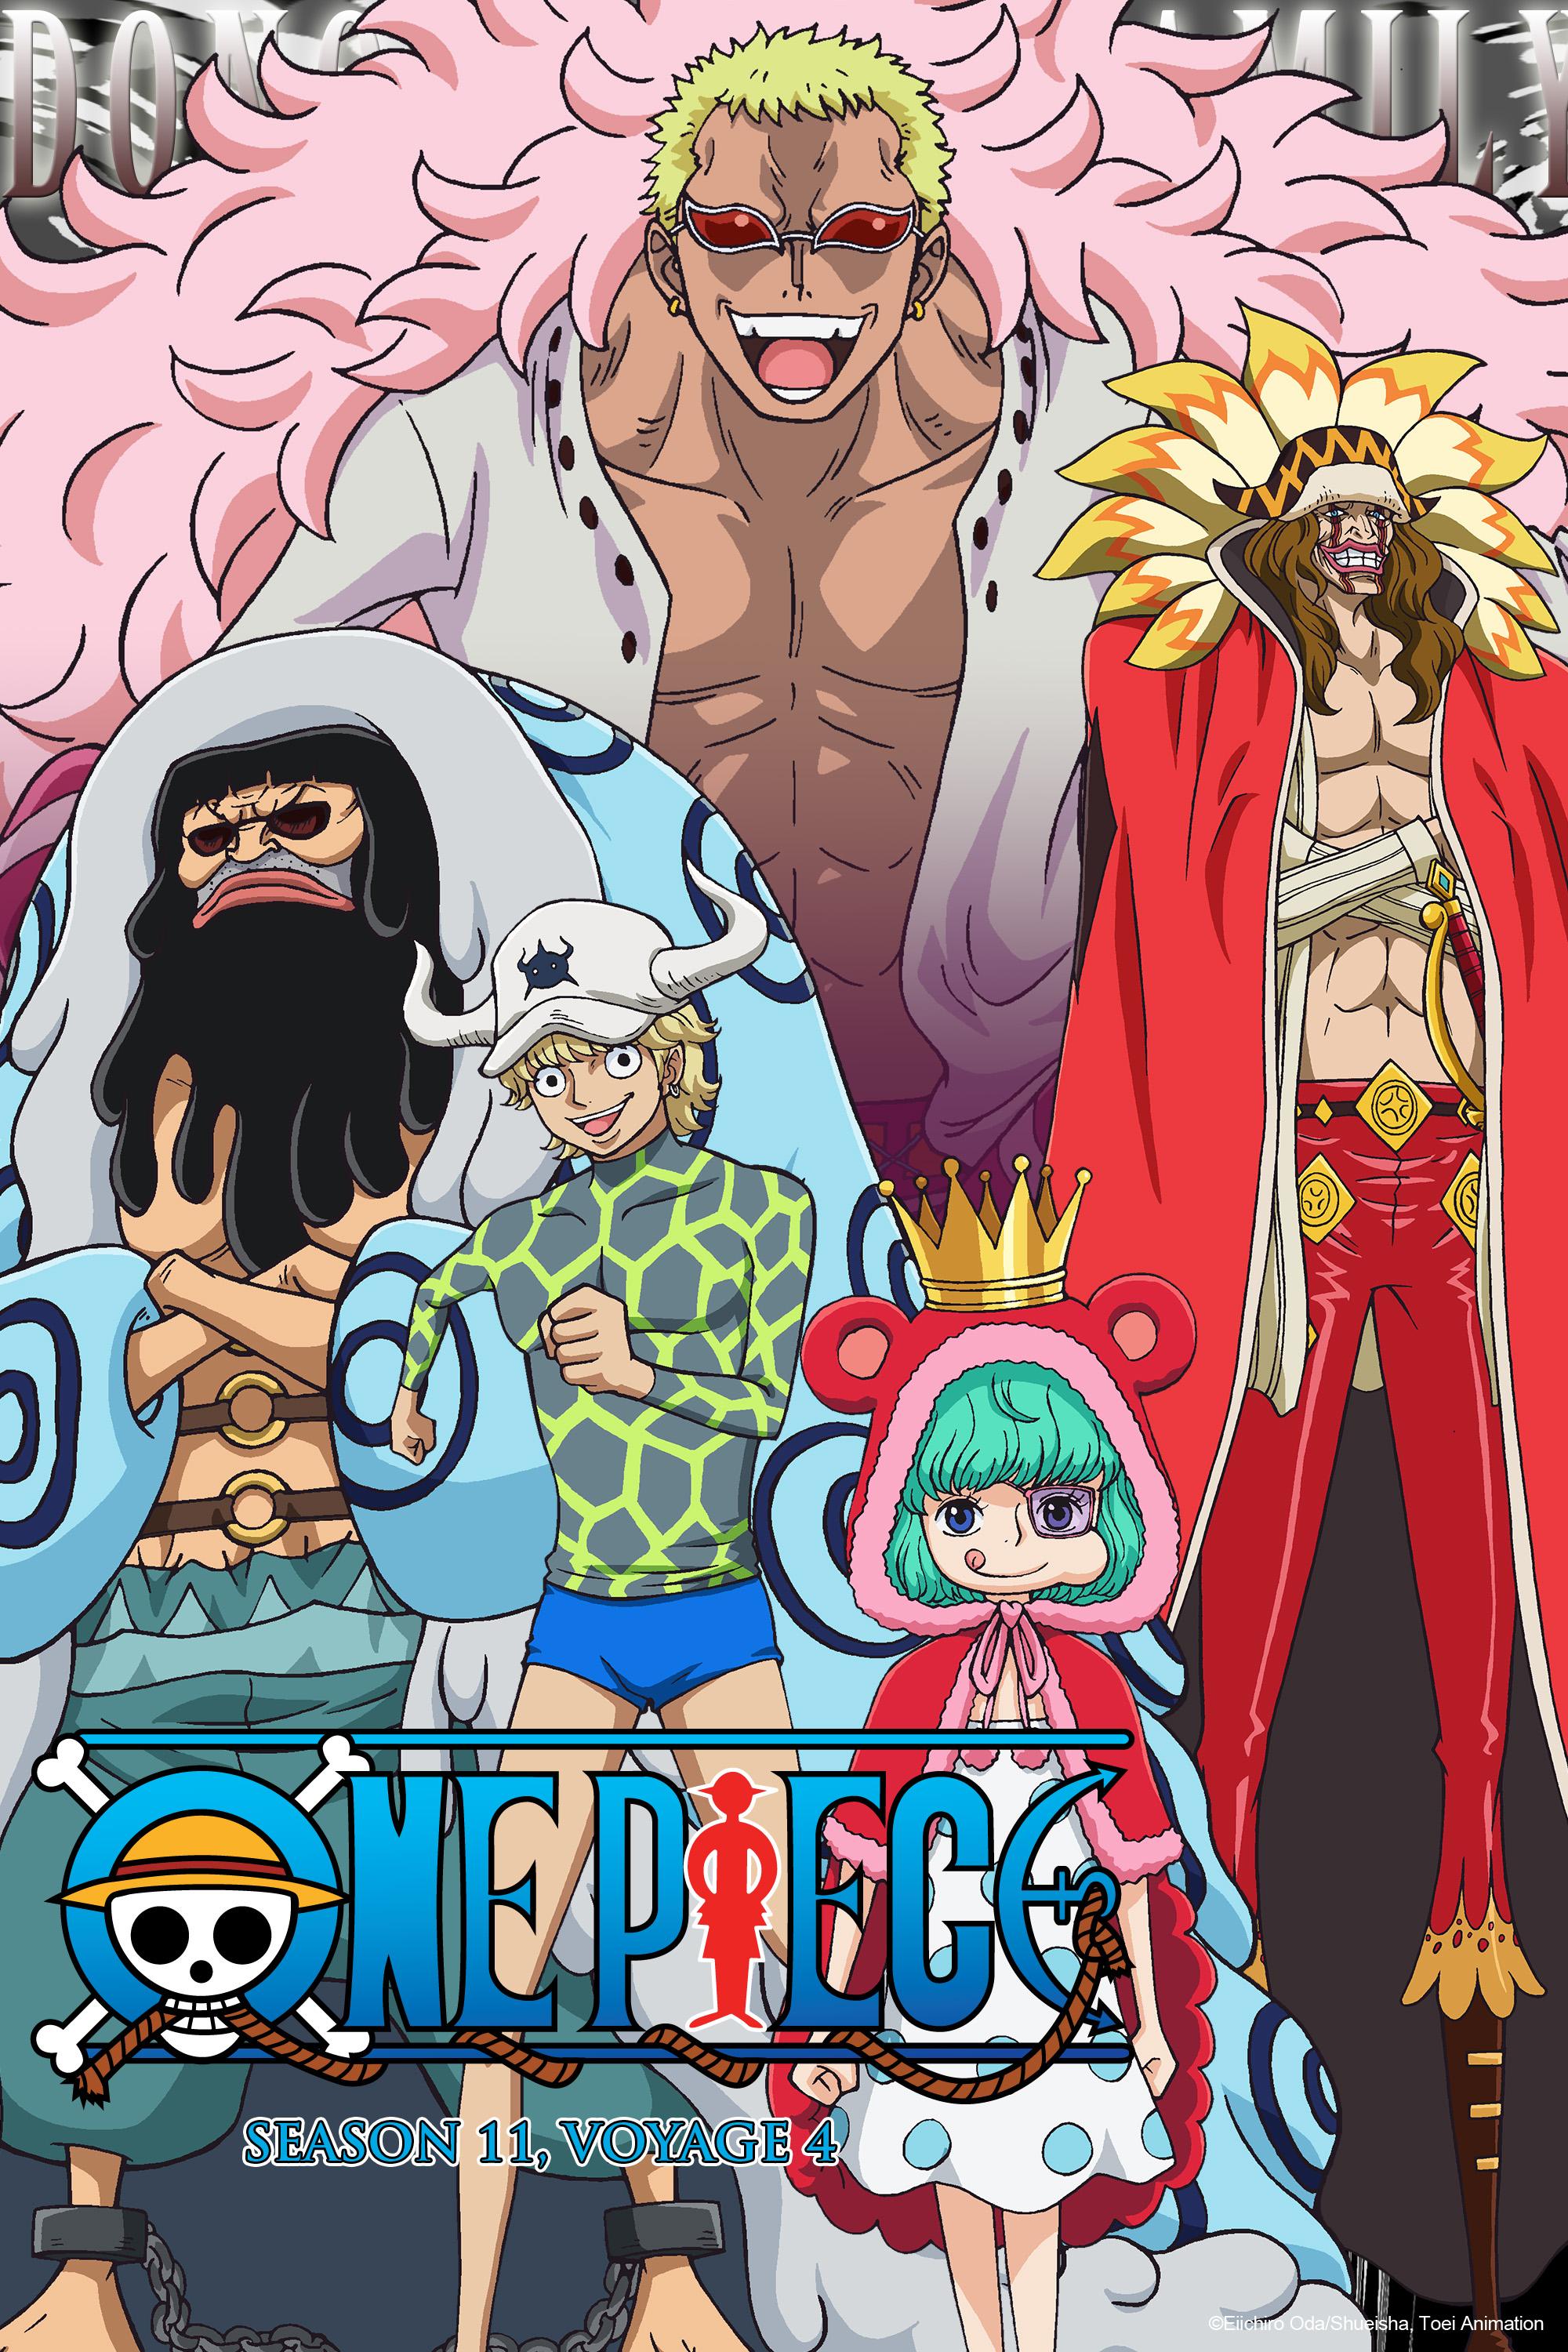 One Piece US on X: THE WAIT IS OVER!🙌 #OnePiece English dubs are now  streaming on @Crunchyroll 🏴‍☠️🎉 Dive into things with episodes 1-976!  WATCH:   / X